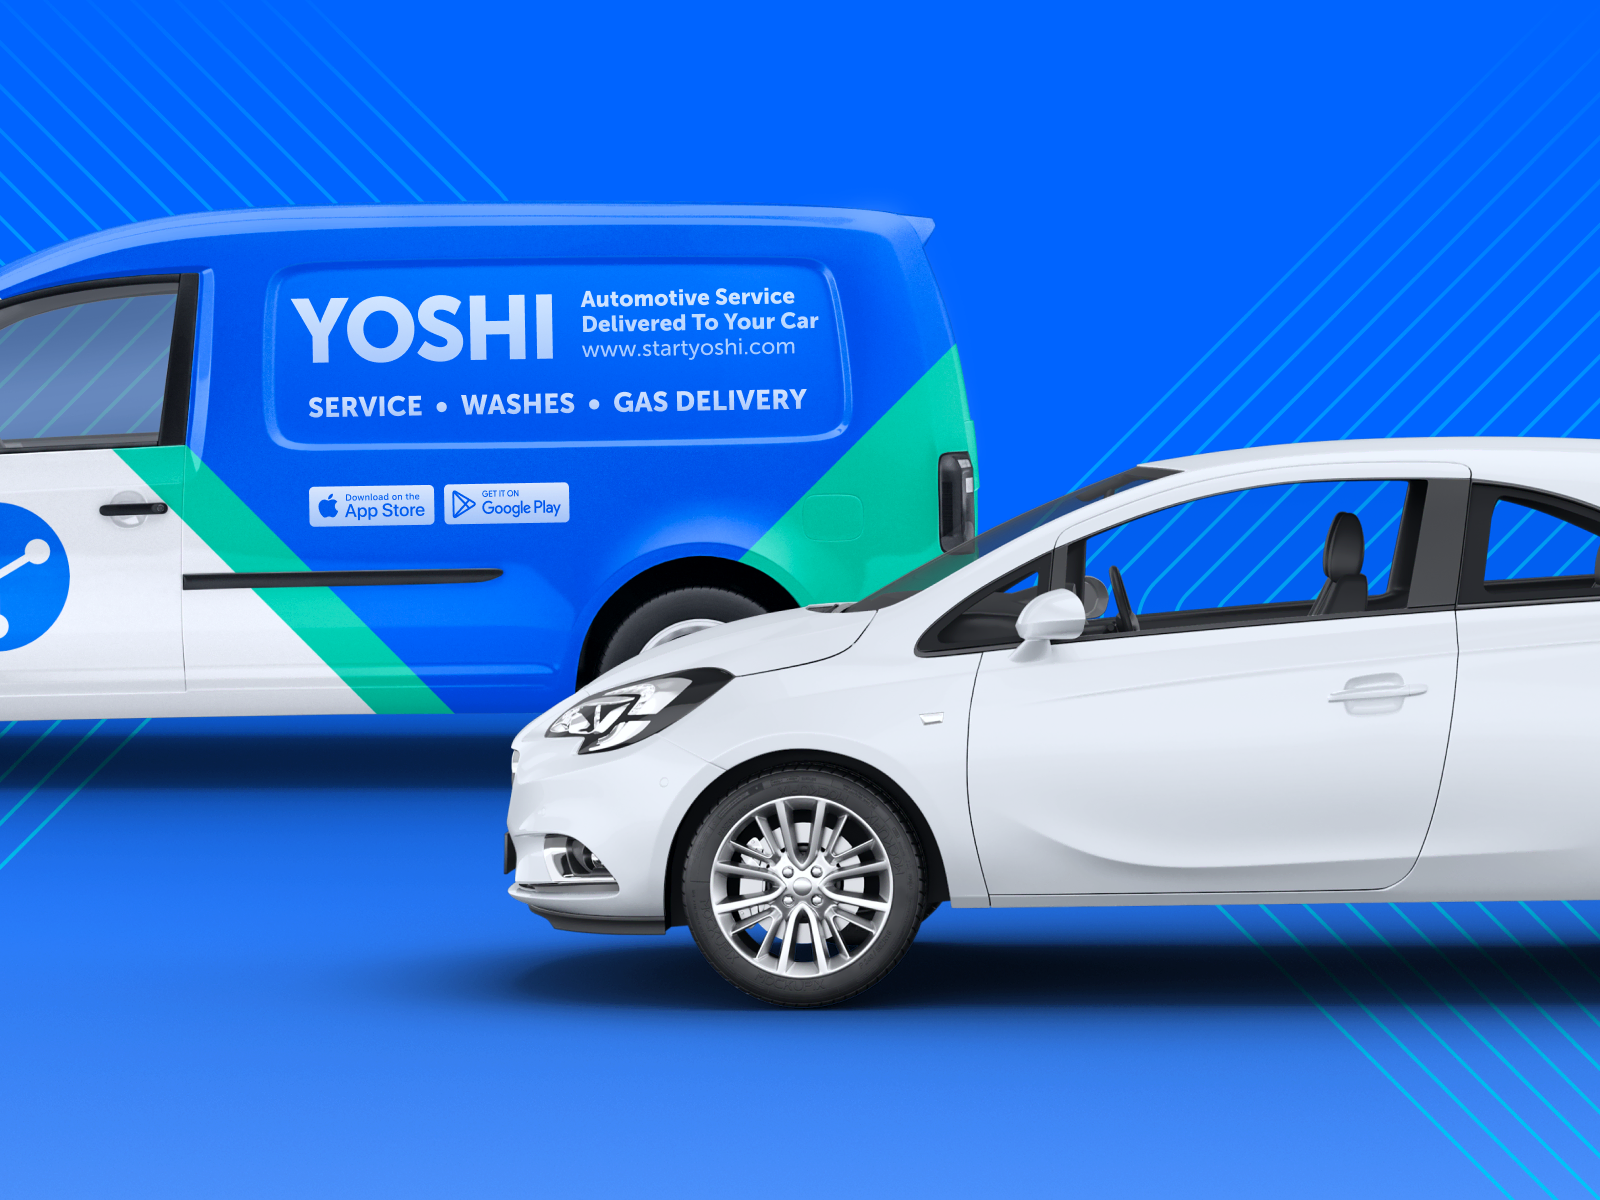 Yoshi fuel, wash, and service delivered to your car